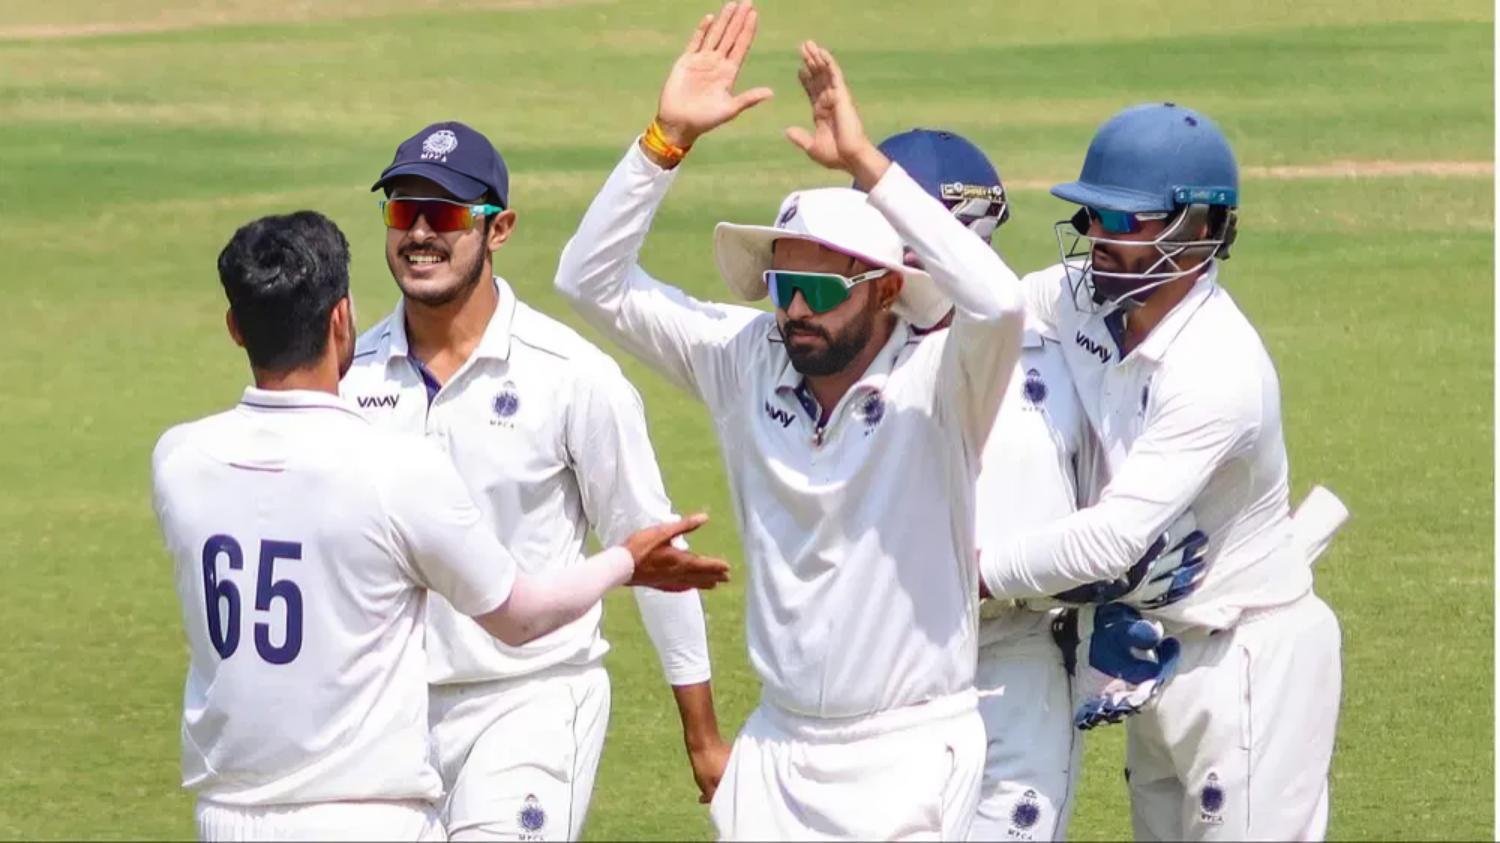 Vidarbha will face 41-time champions Mumbai, for the first time in Ranji Trophy history. की तस्वीर